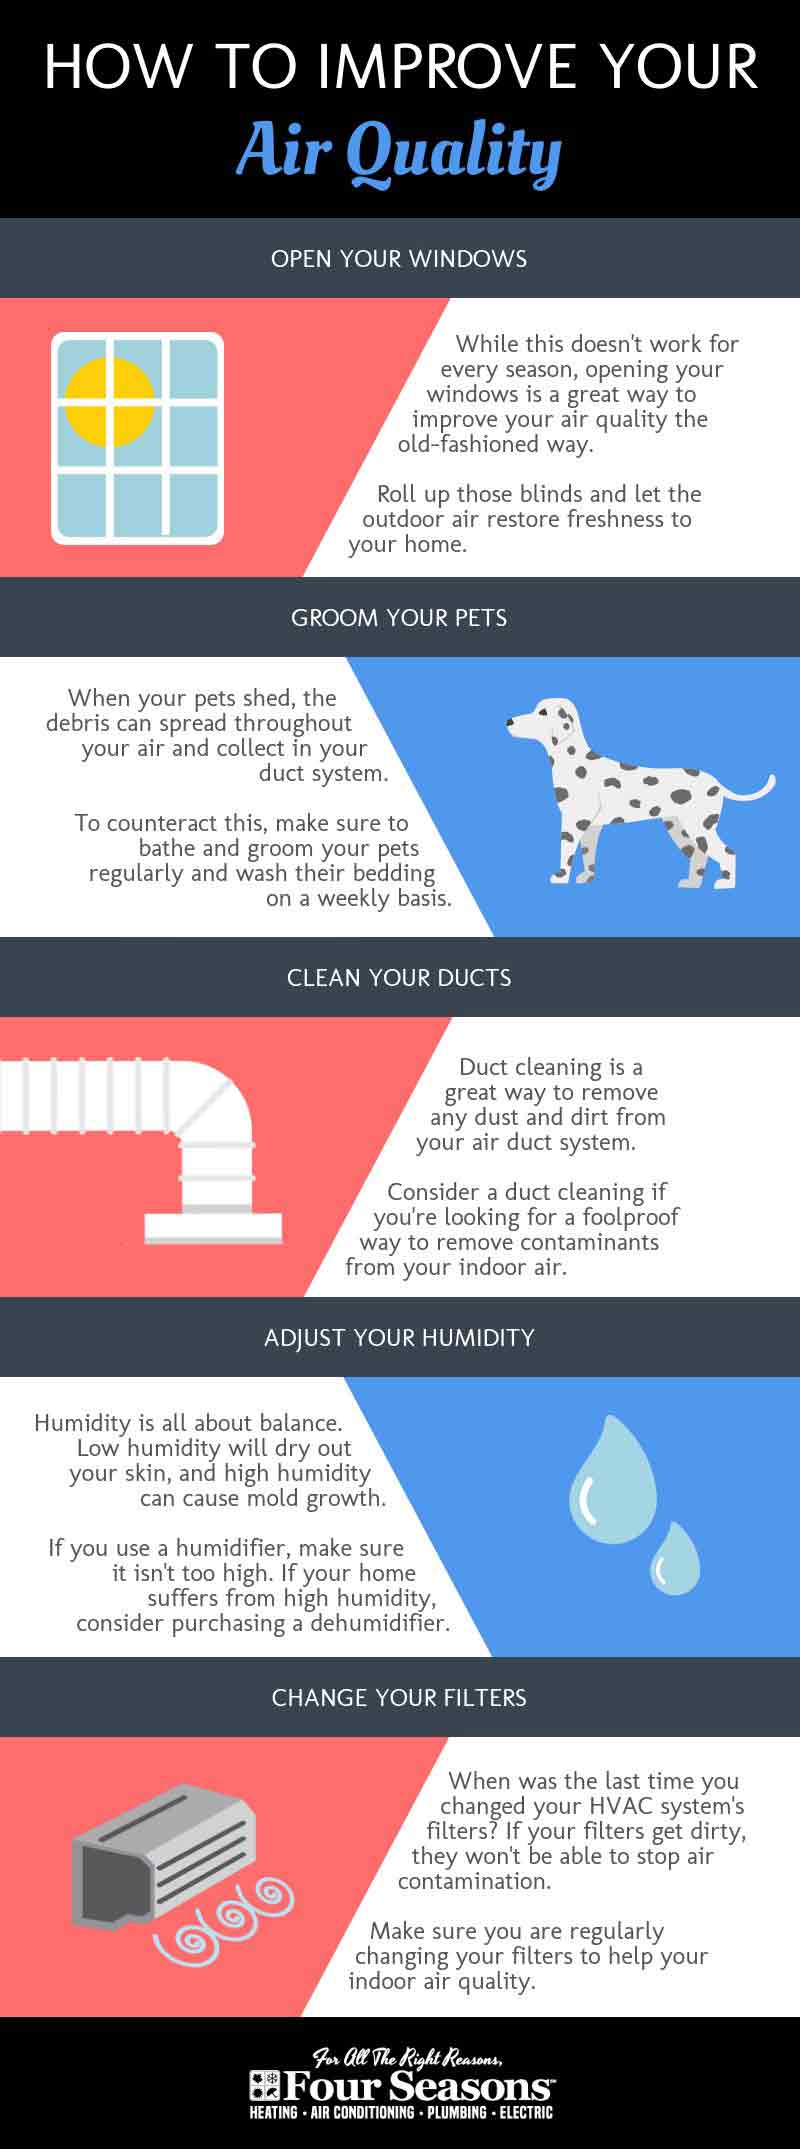 ways to improve air quality